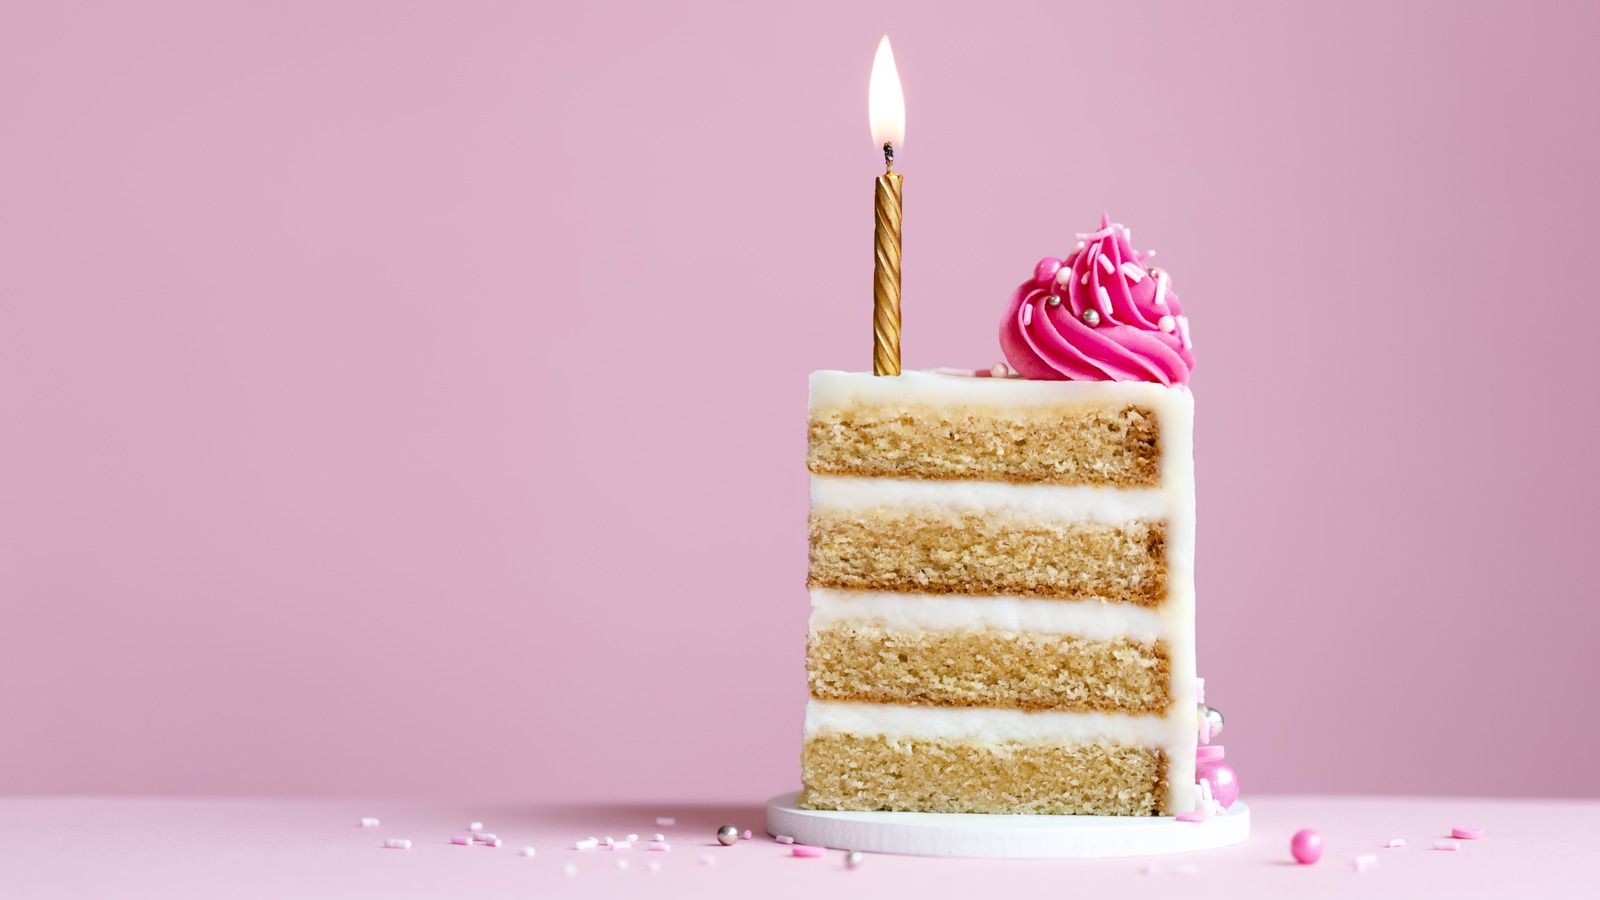 Cake Slice Images | Free Photos, PNG Stickers, Wallpapers & Backgrounds -  rawpixel